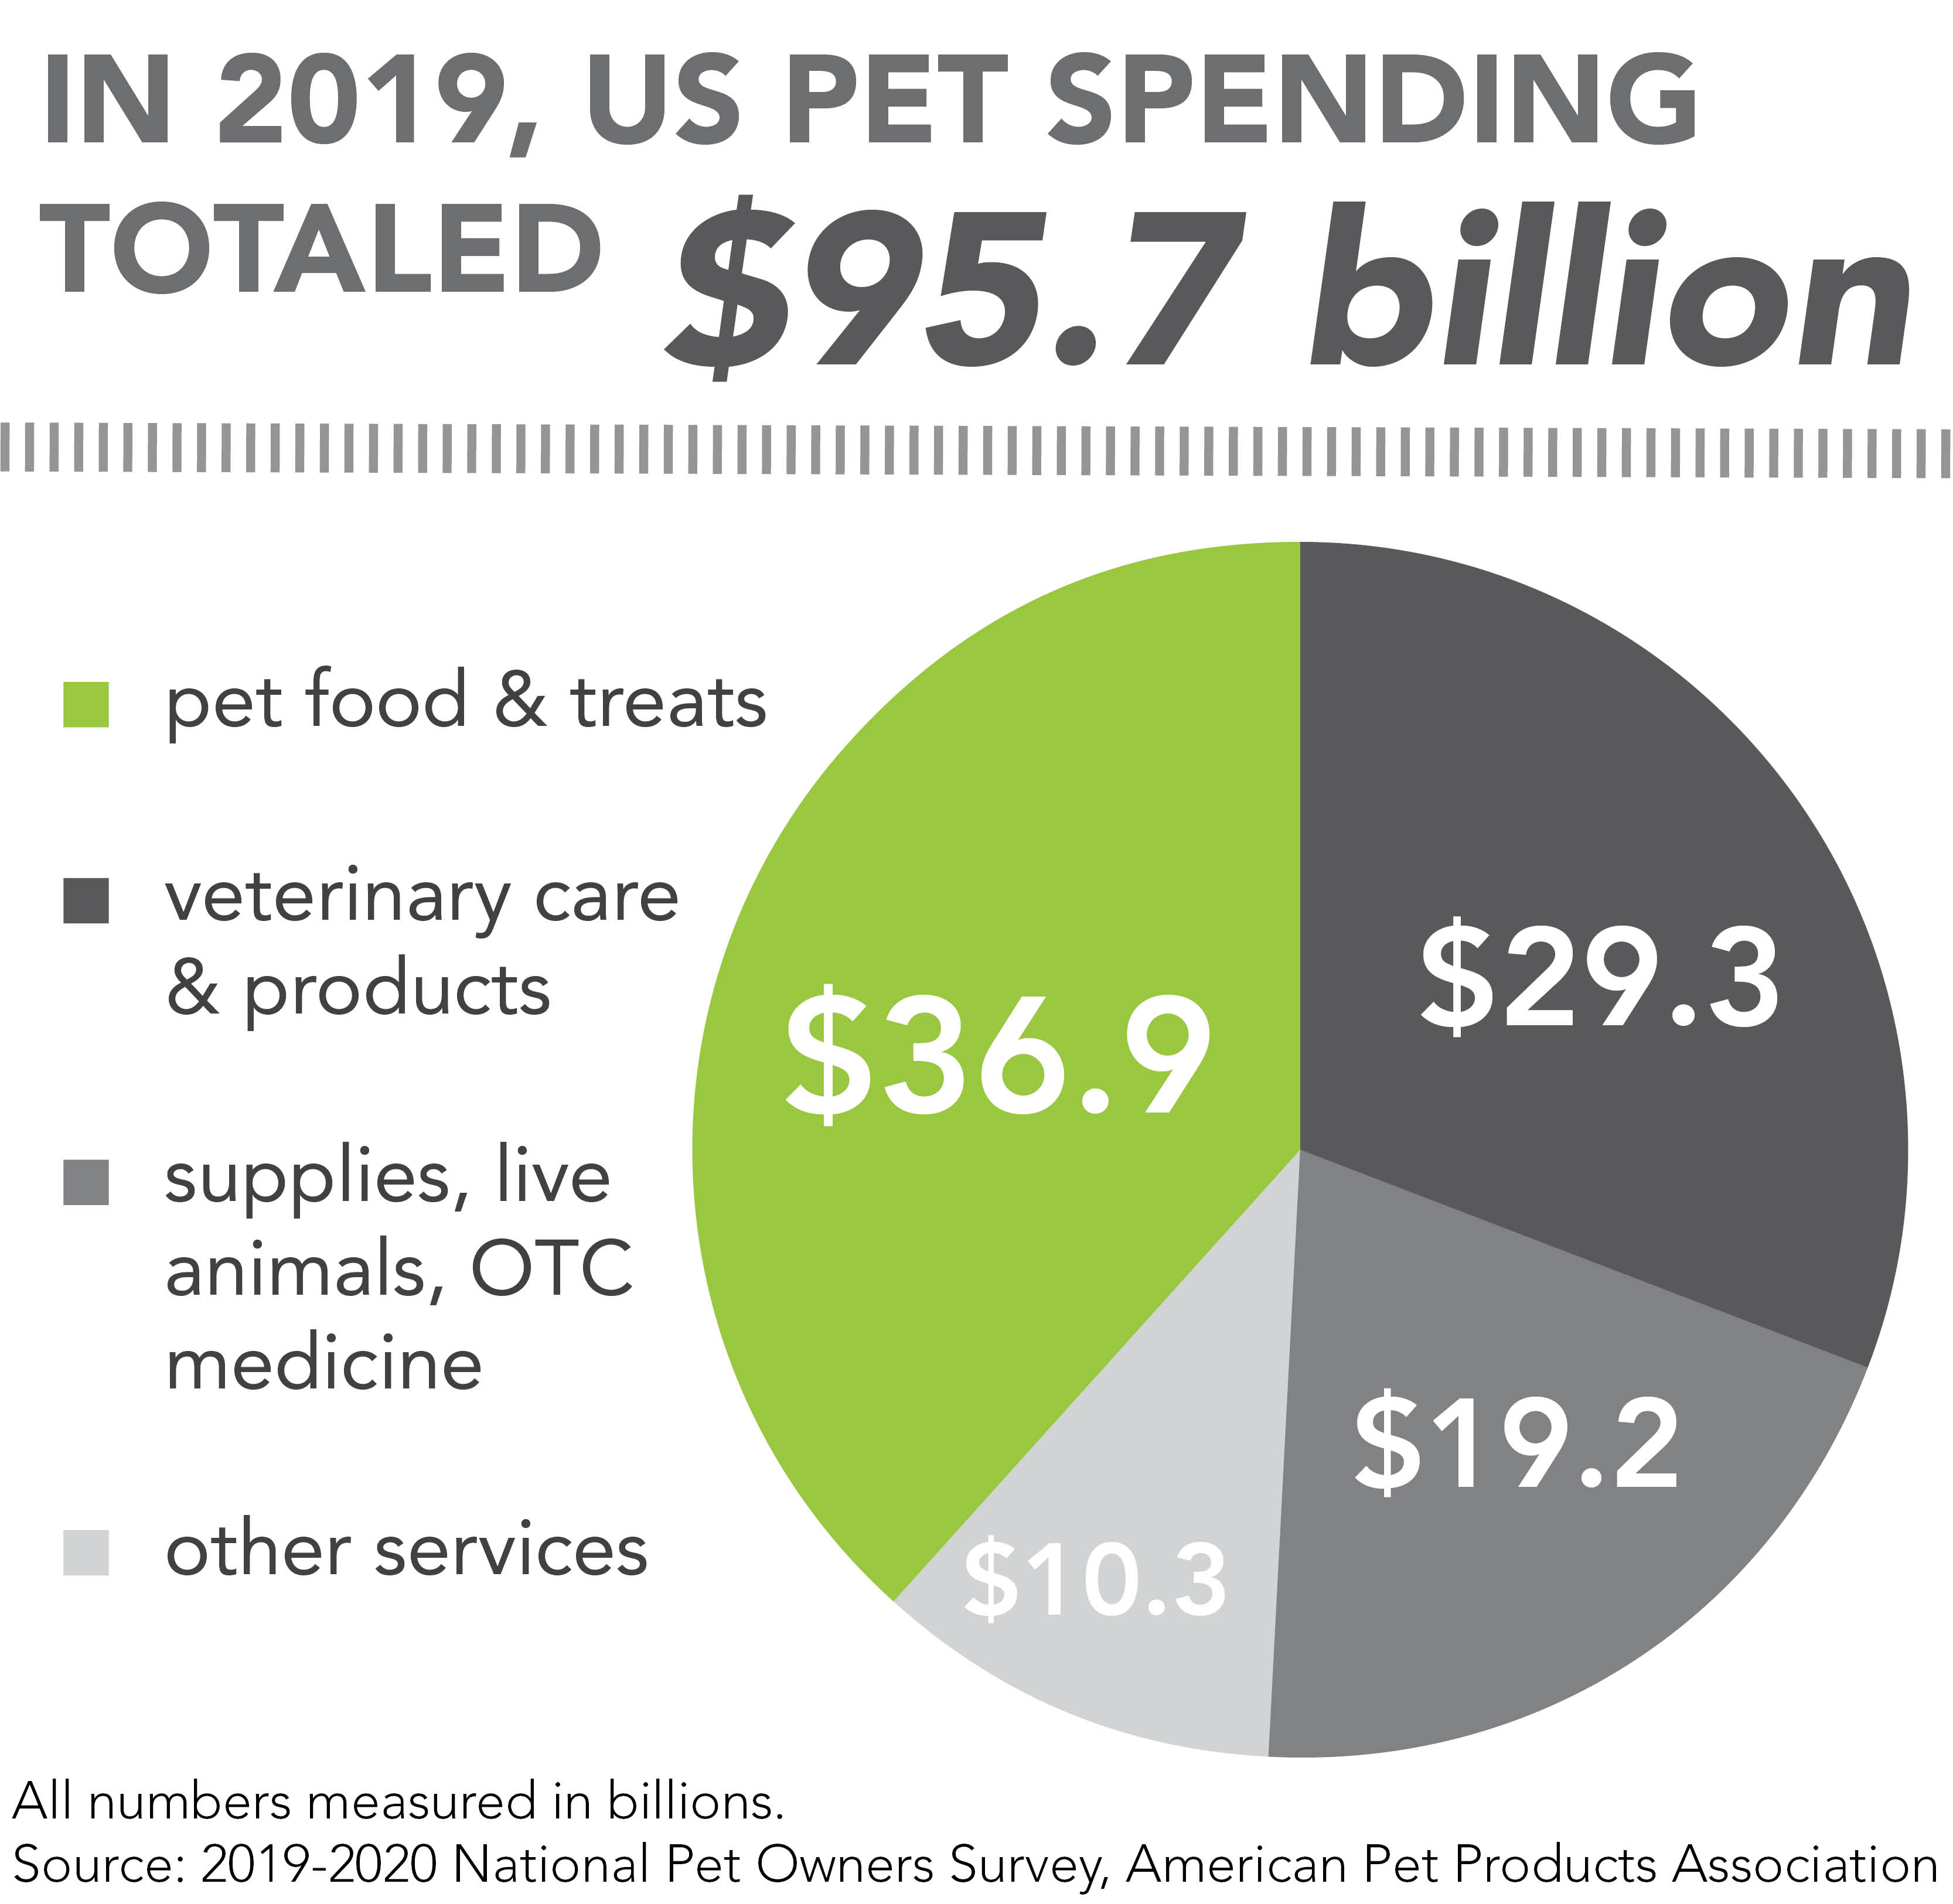 APPA's total estimated pet spending for 2019